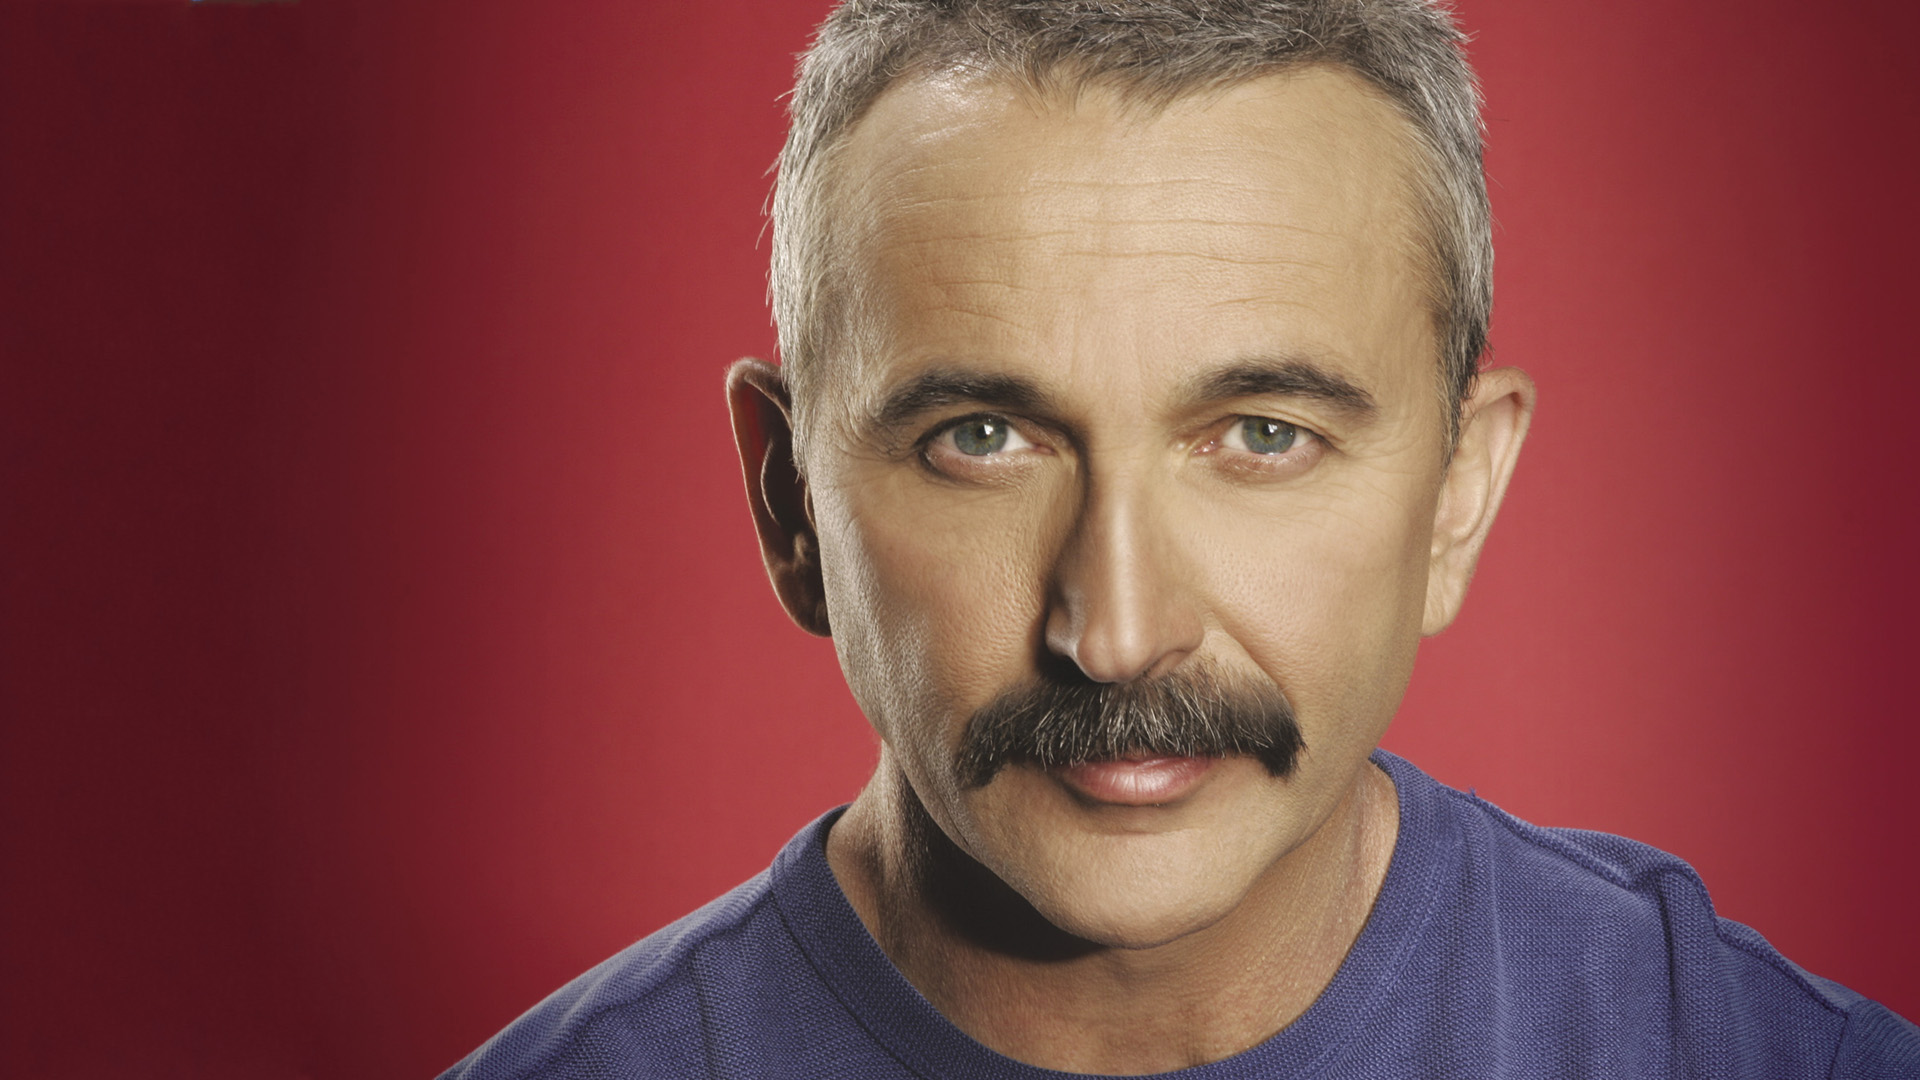 At The End Of The Day av Aaron Tippin